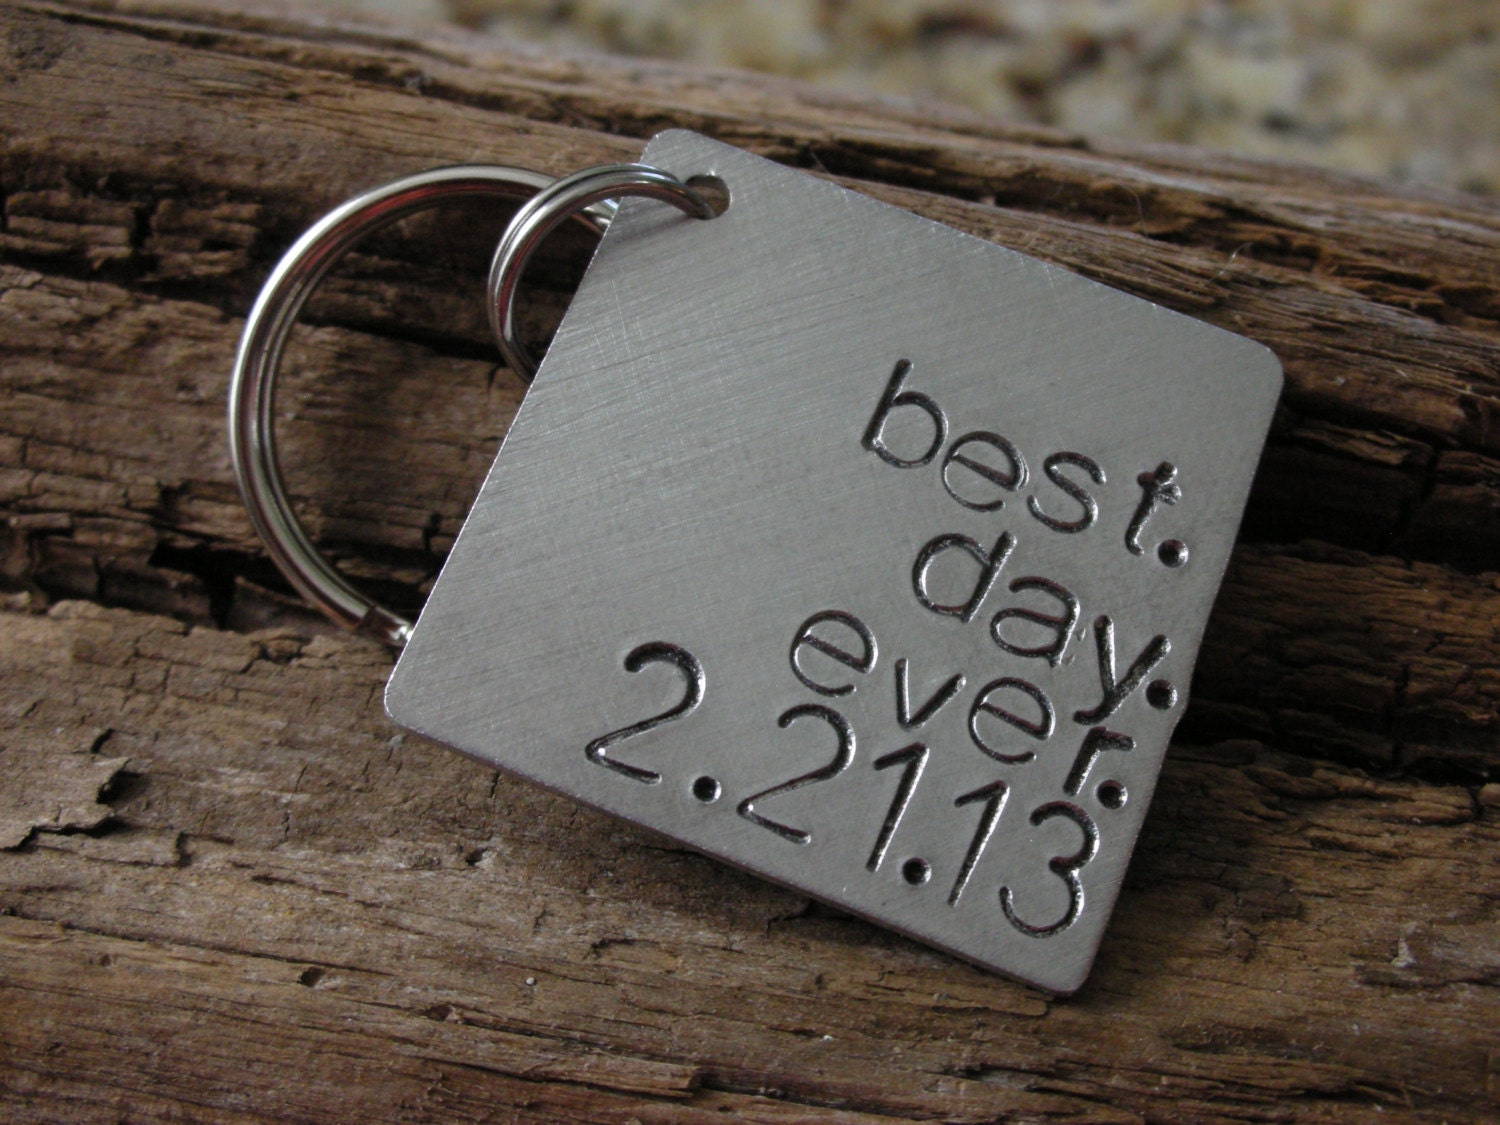 best.day.ever. keychain with date-Custom Handstamped Personalized Keychain-Wedding Gift-Engagement Gift-New Baby Gift